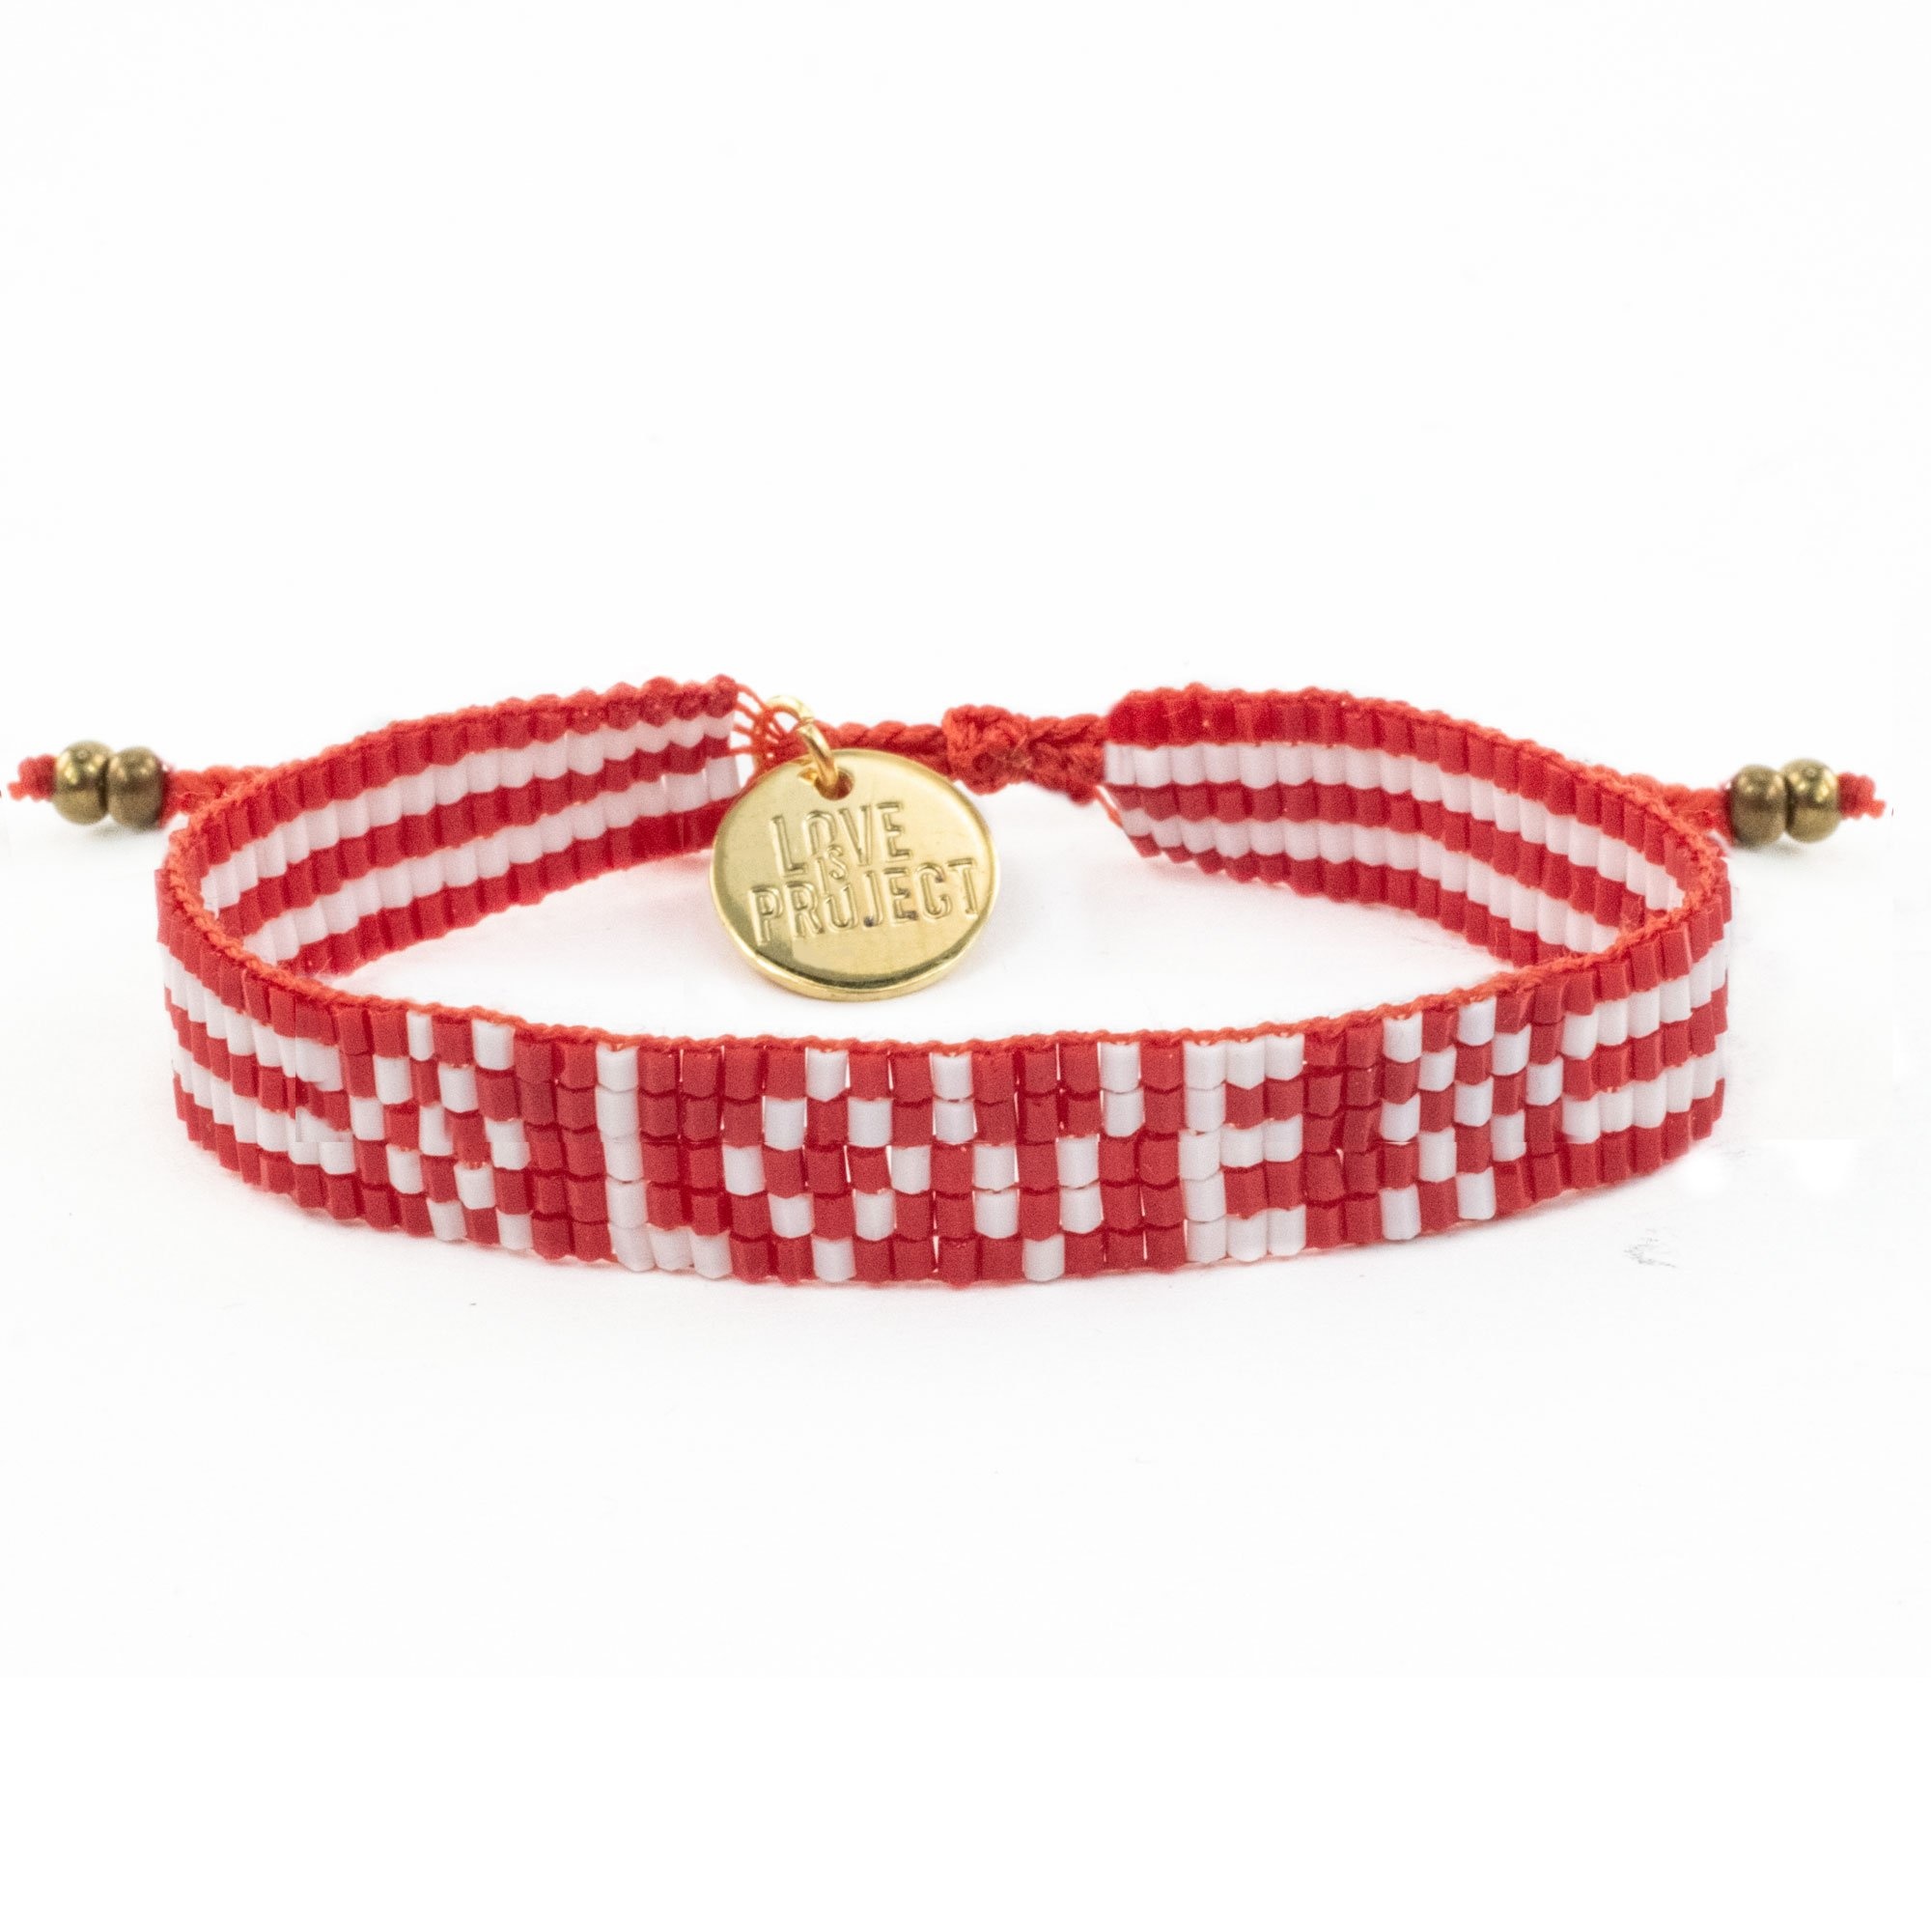 Love Project Seed Bead LOVE Bracelet - Red